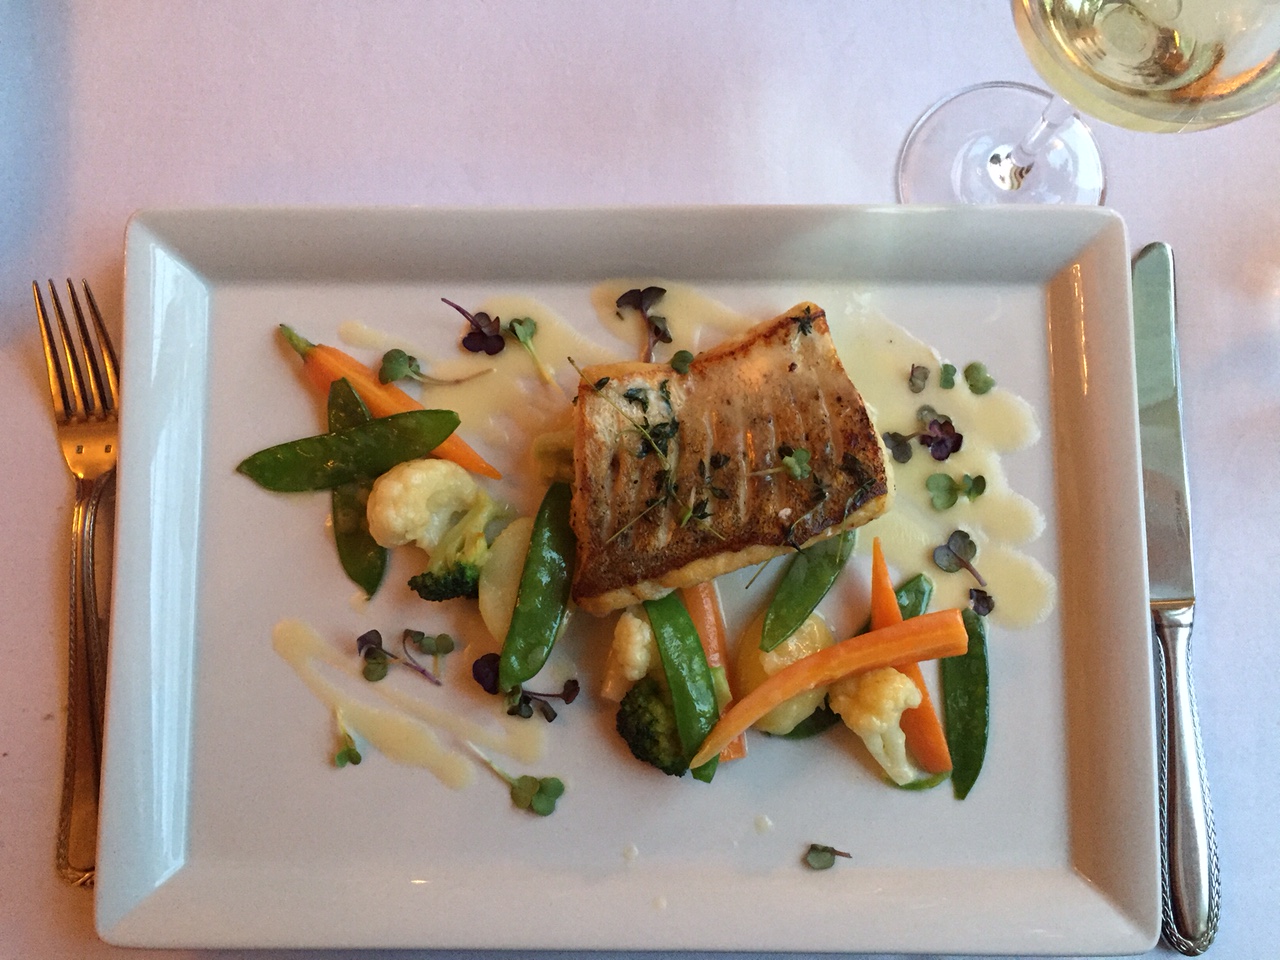 Piano Nobile at Villa Richter : European Pike Perch ("Zander") Filet, seasonal vegetables and buttery white wine sauce